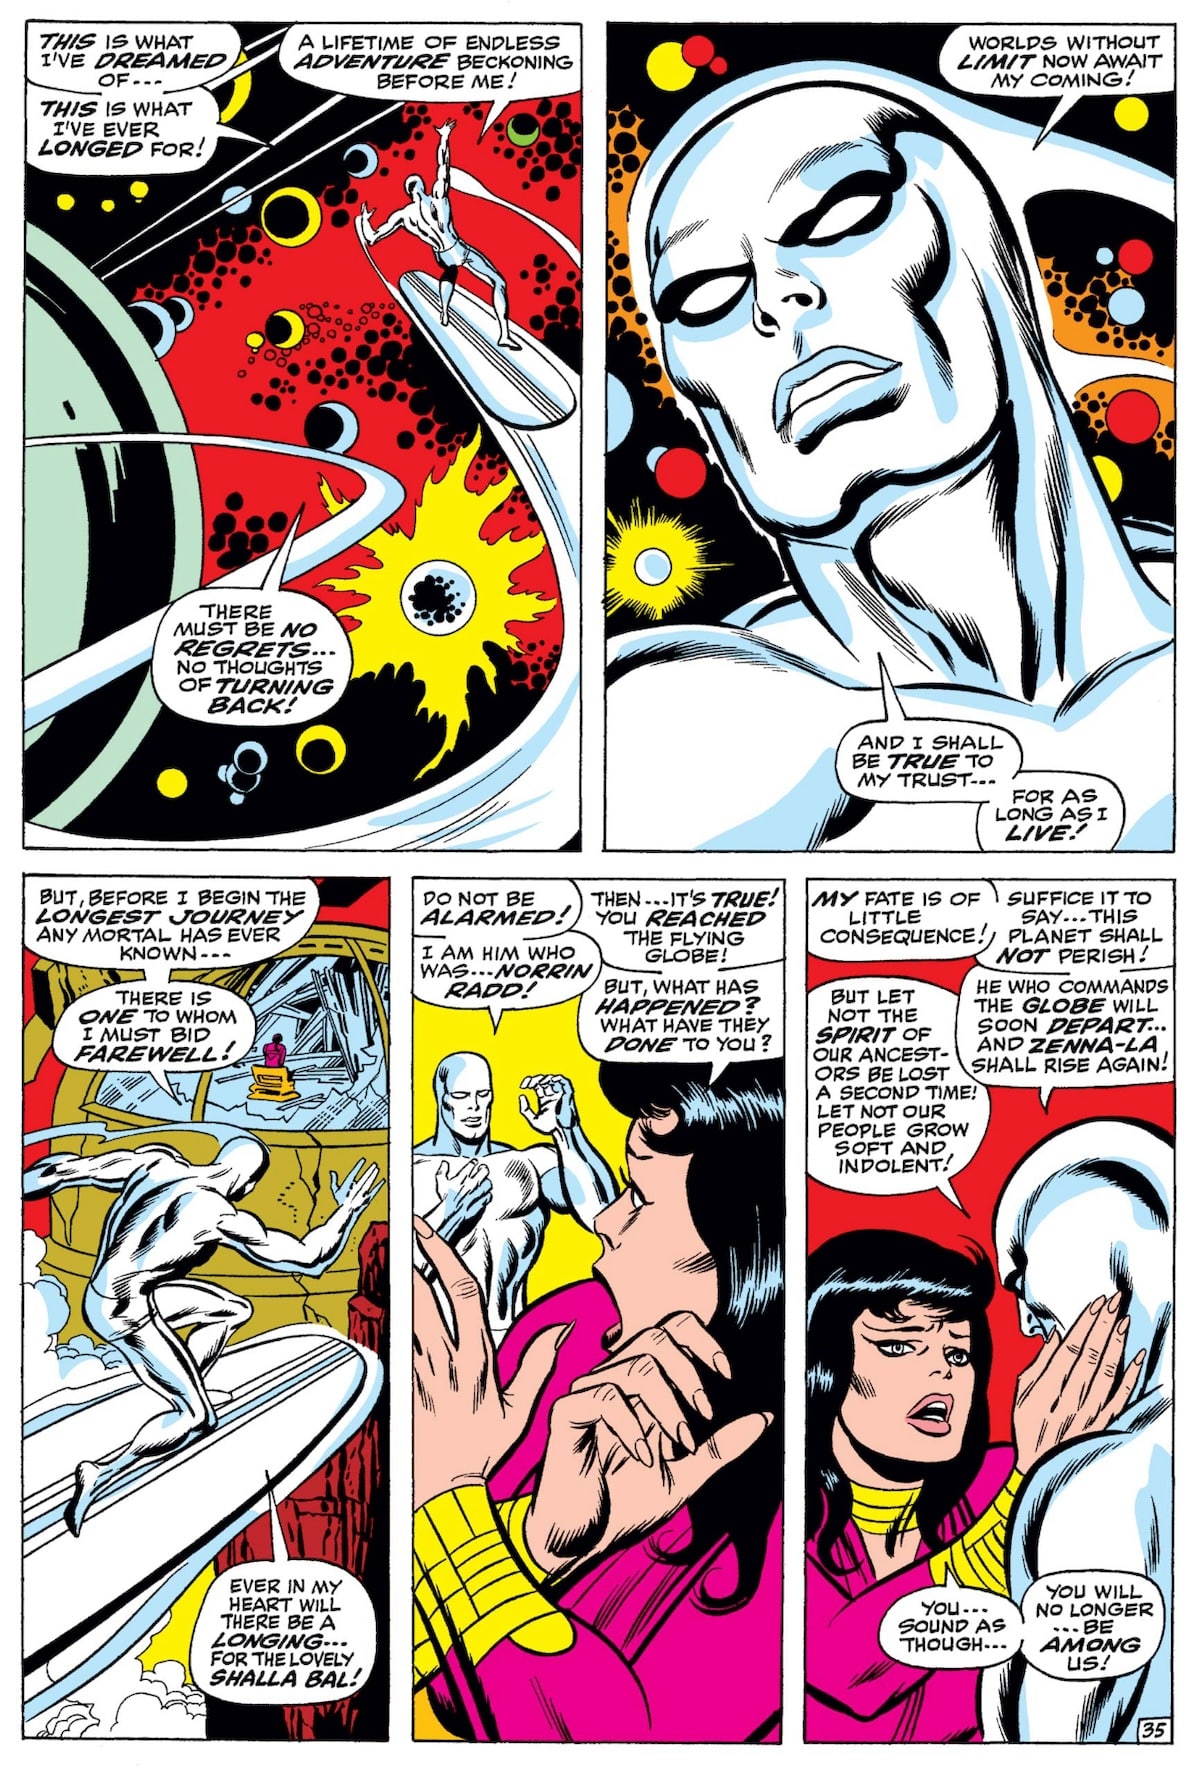 Silver Surfer contemplates his new role as Galactus' herald. He tells Shalla-Bal the bad news.